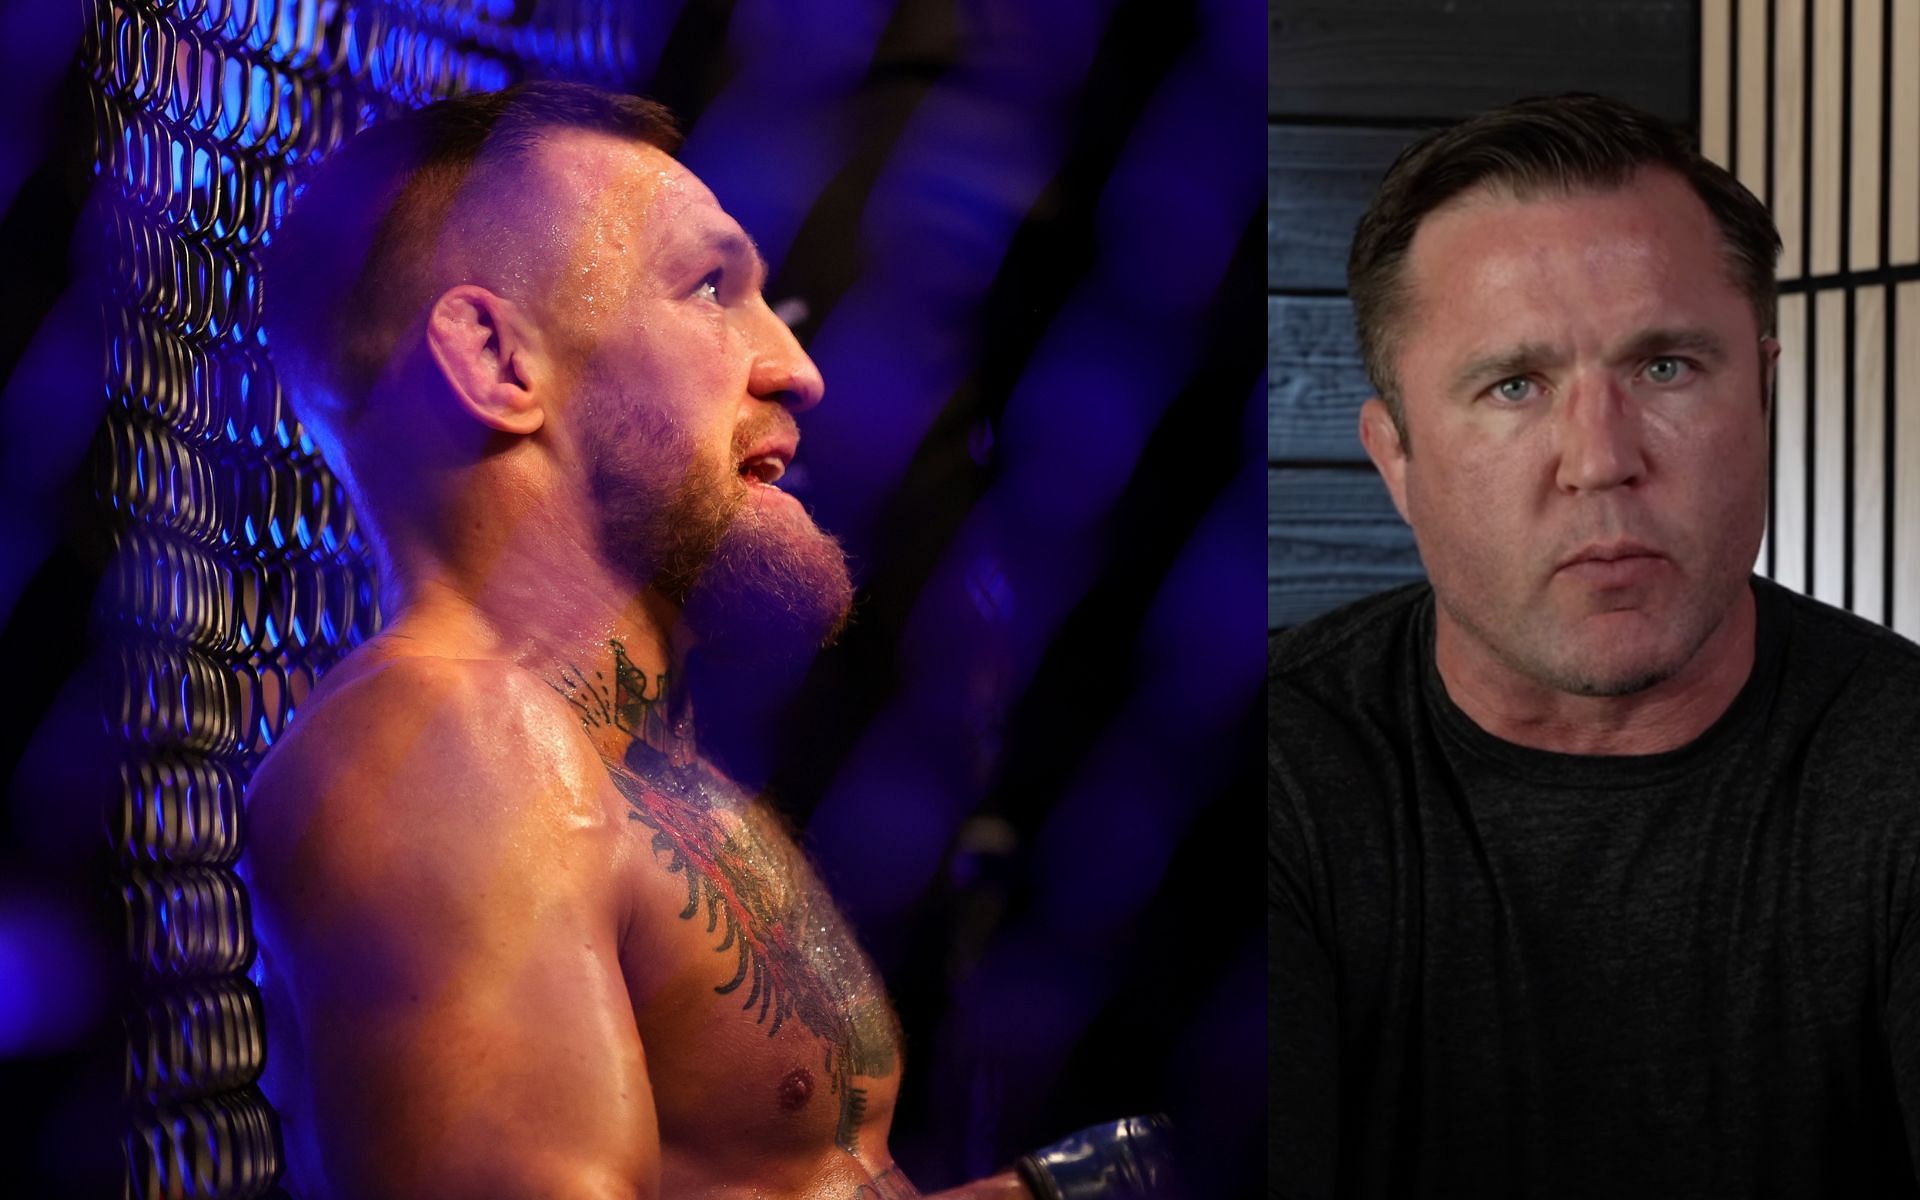 Conor McGregor (left) and Chael Sonnen (right). [via Getty Images and YouTube Chael Sonnen]